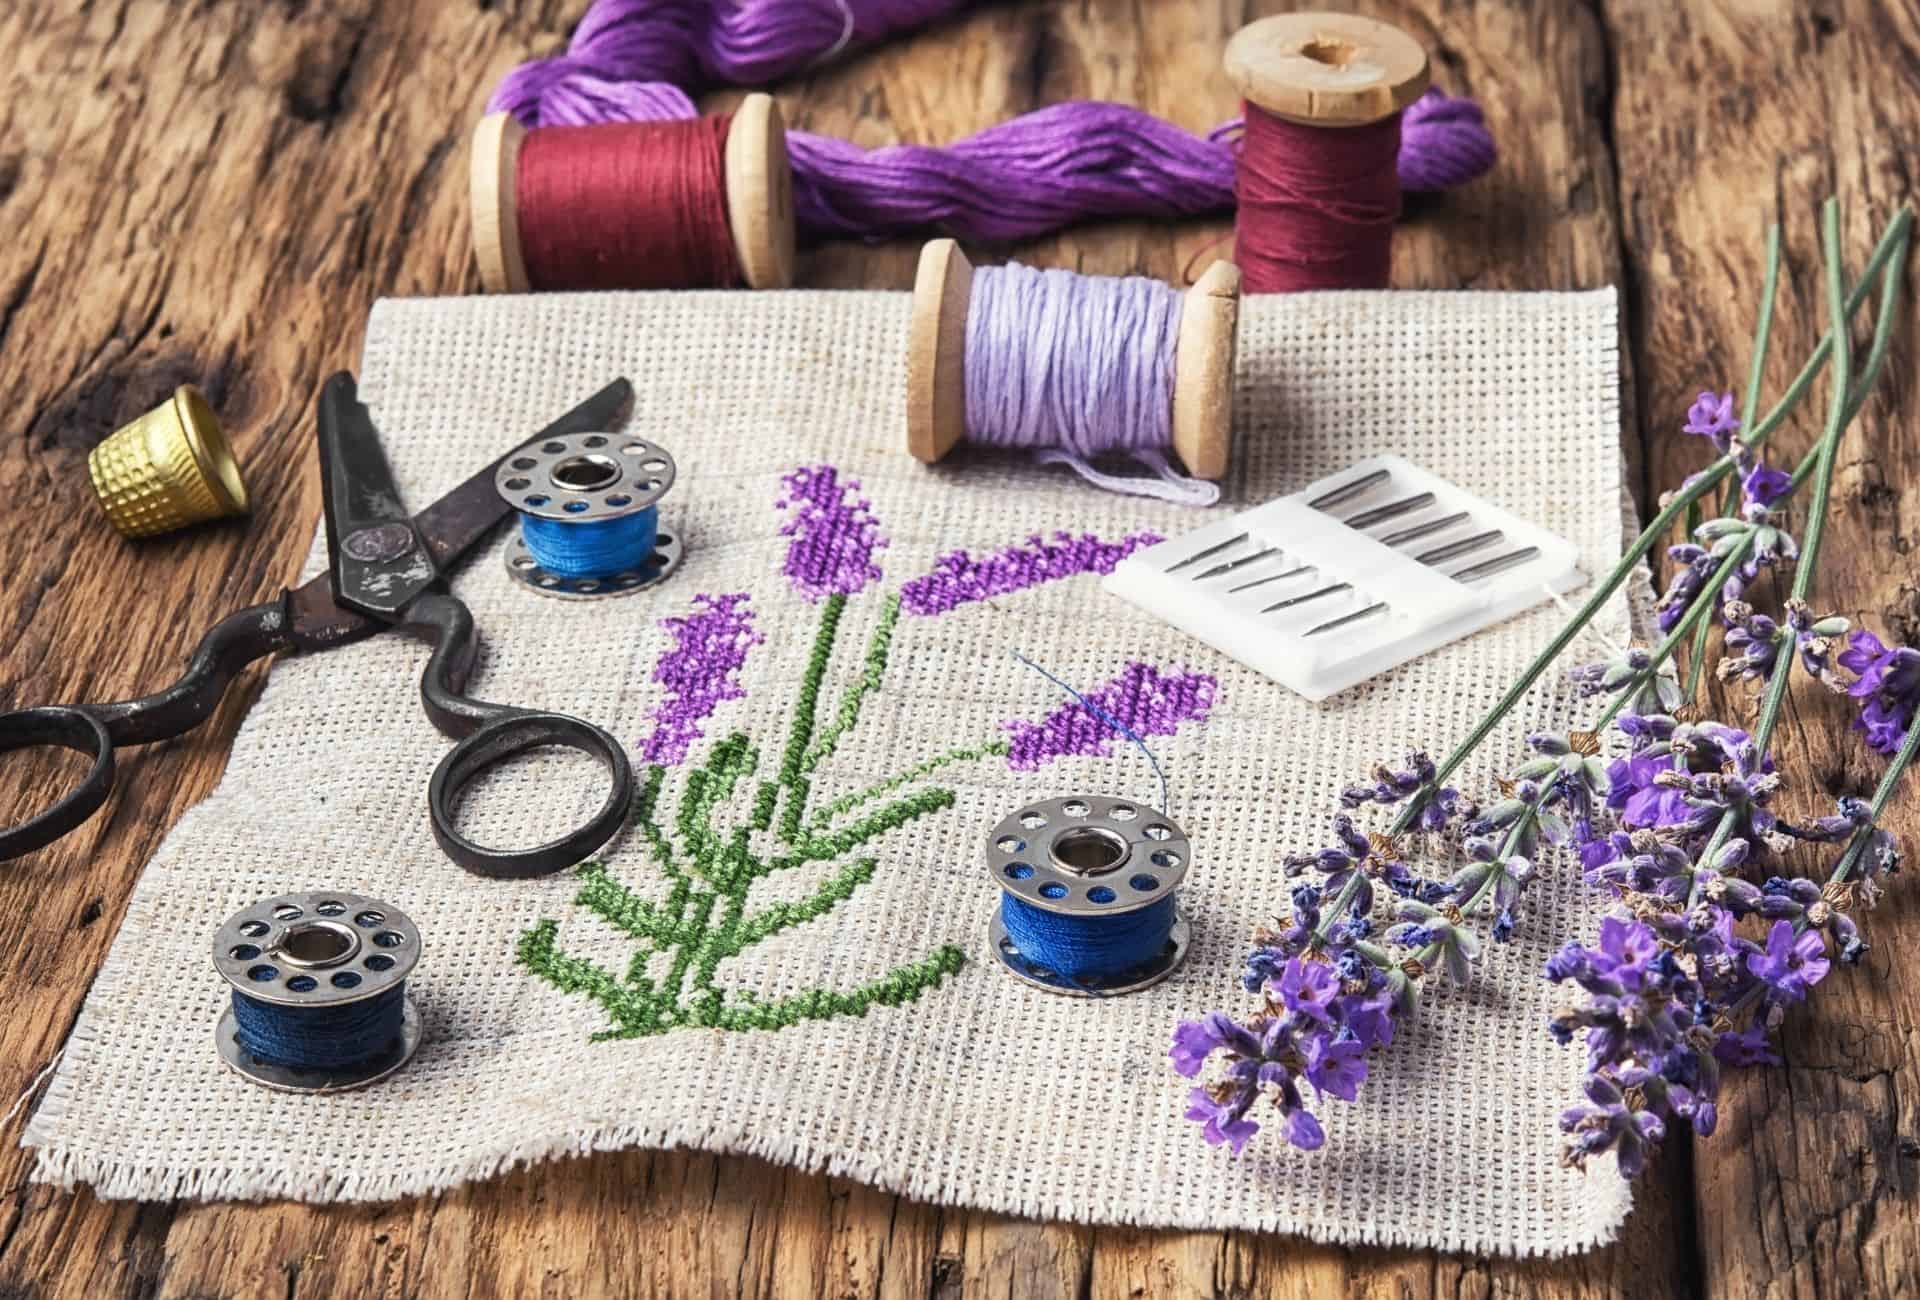 Lavender embroidery is arranged on the table with various tools.